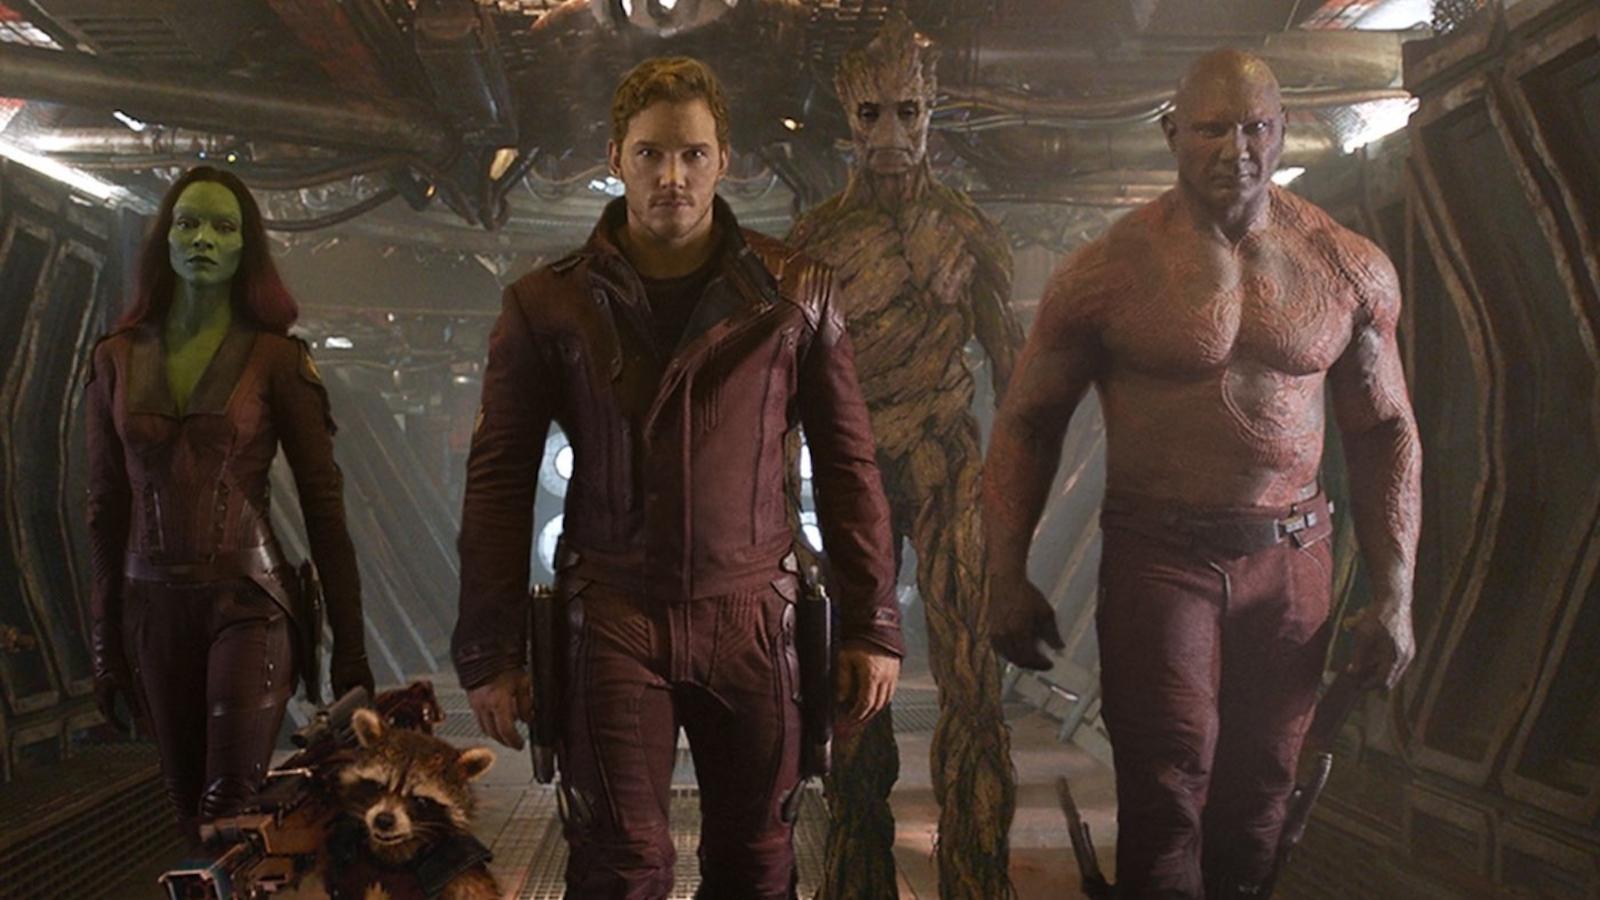 Gamora, Star-Lord, Groot and Drax in Guardians of the Galaxy